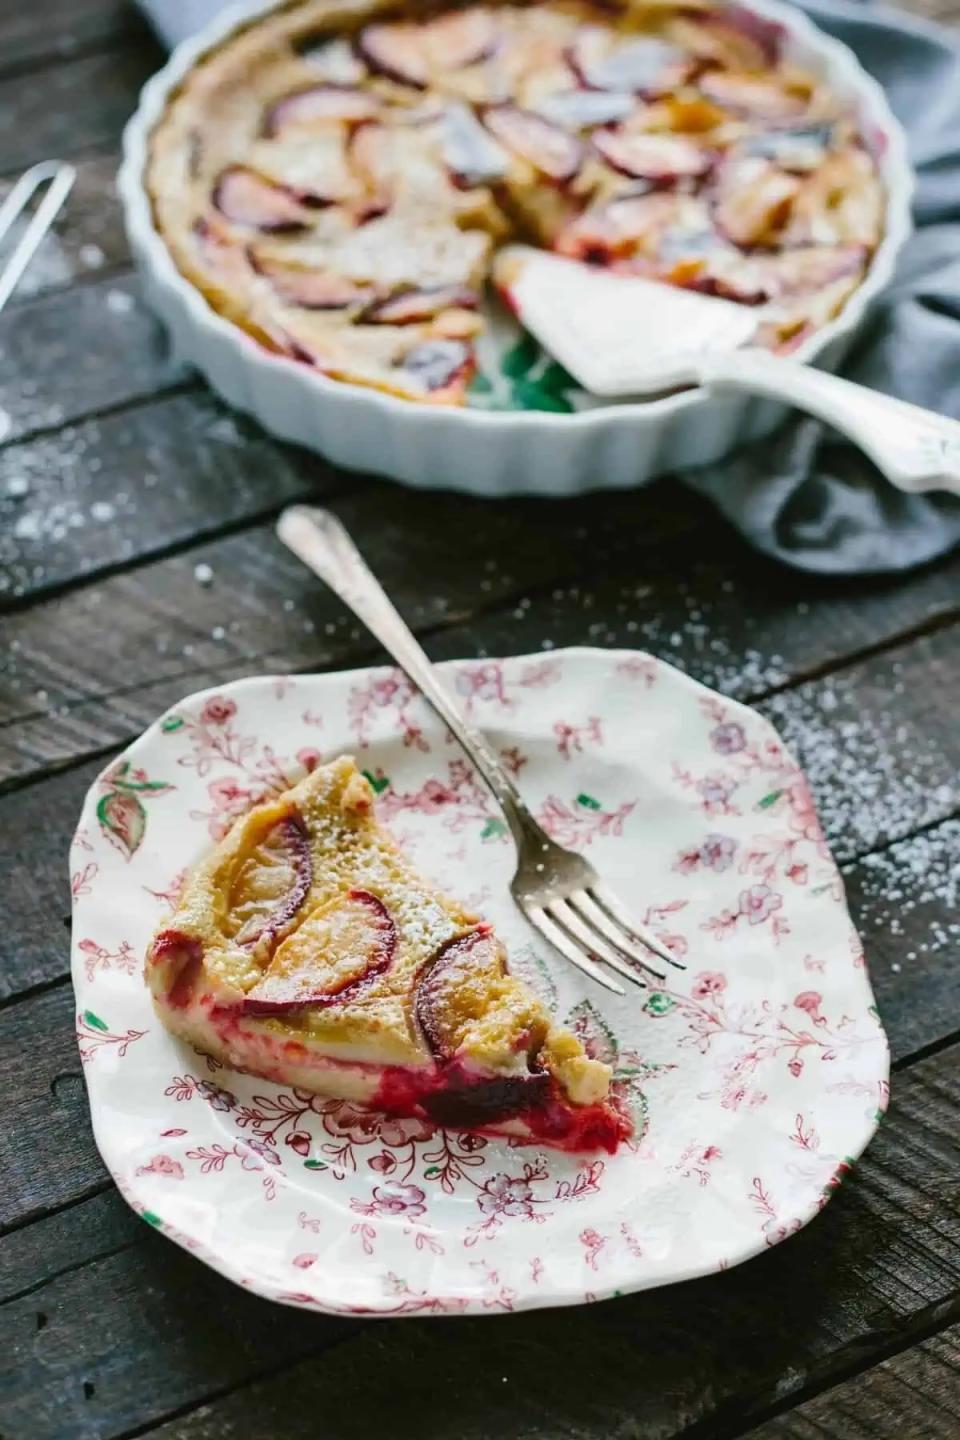 A slice of fruit tart on a decorative plate with a fork, and a larger tart with a missing slice in the background on a wooden table